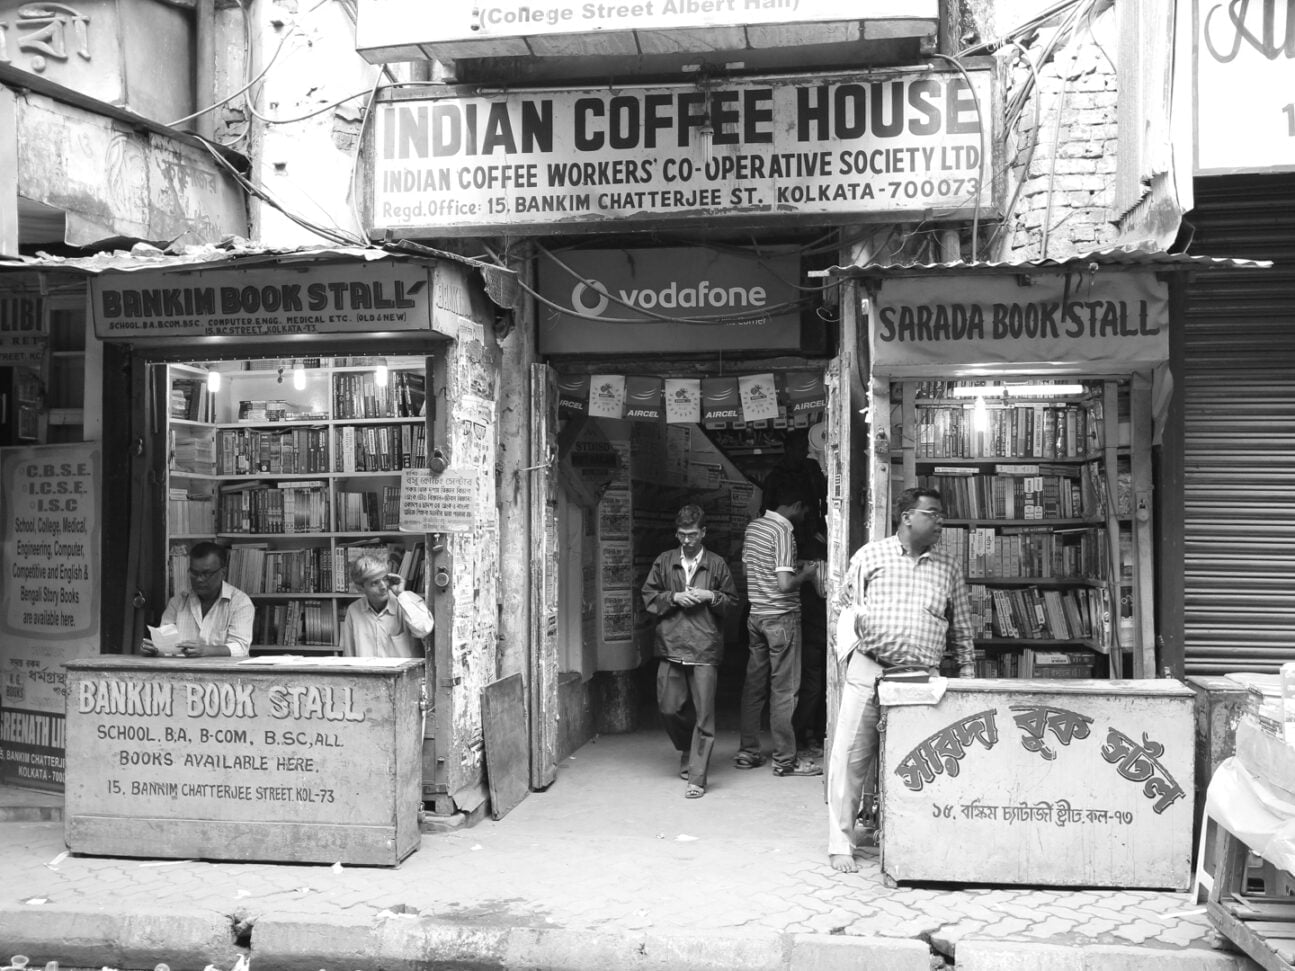 Indian Coffee House, Indian Coffee Worker's co-operative society. CC BY-SA 2.0